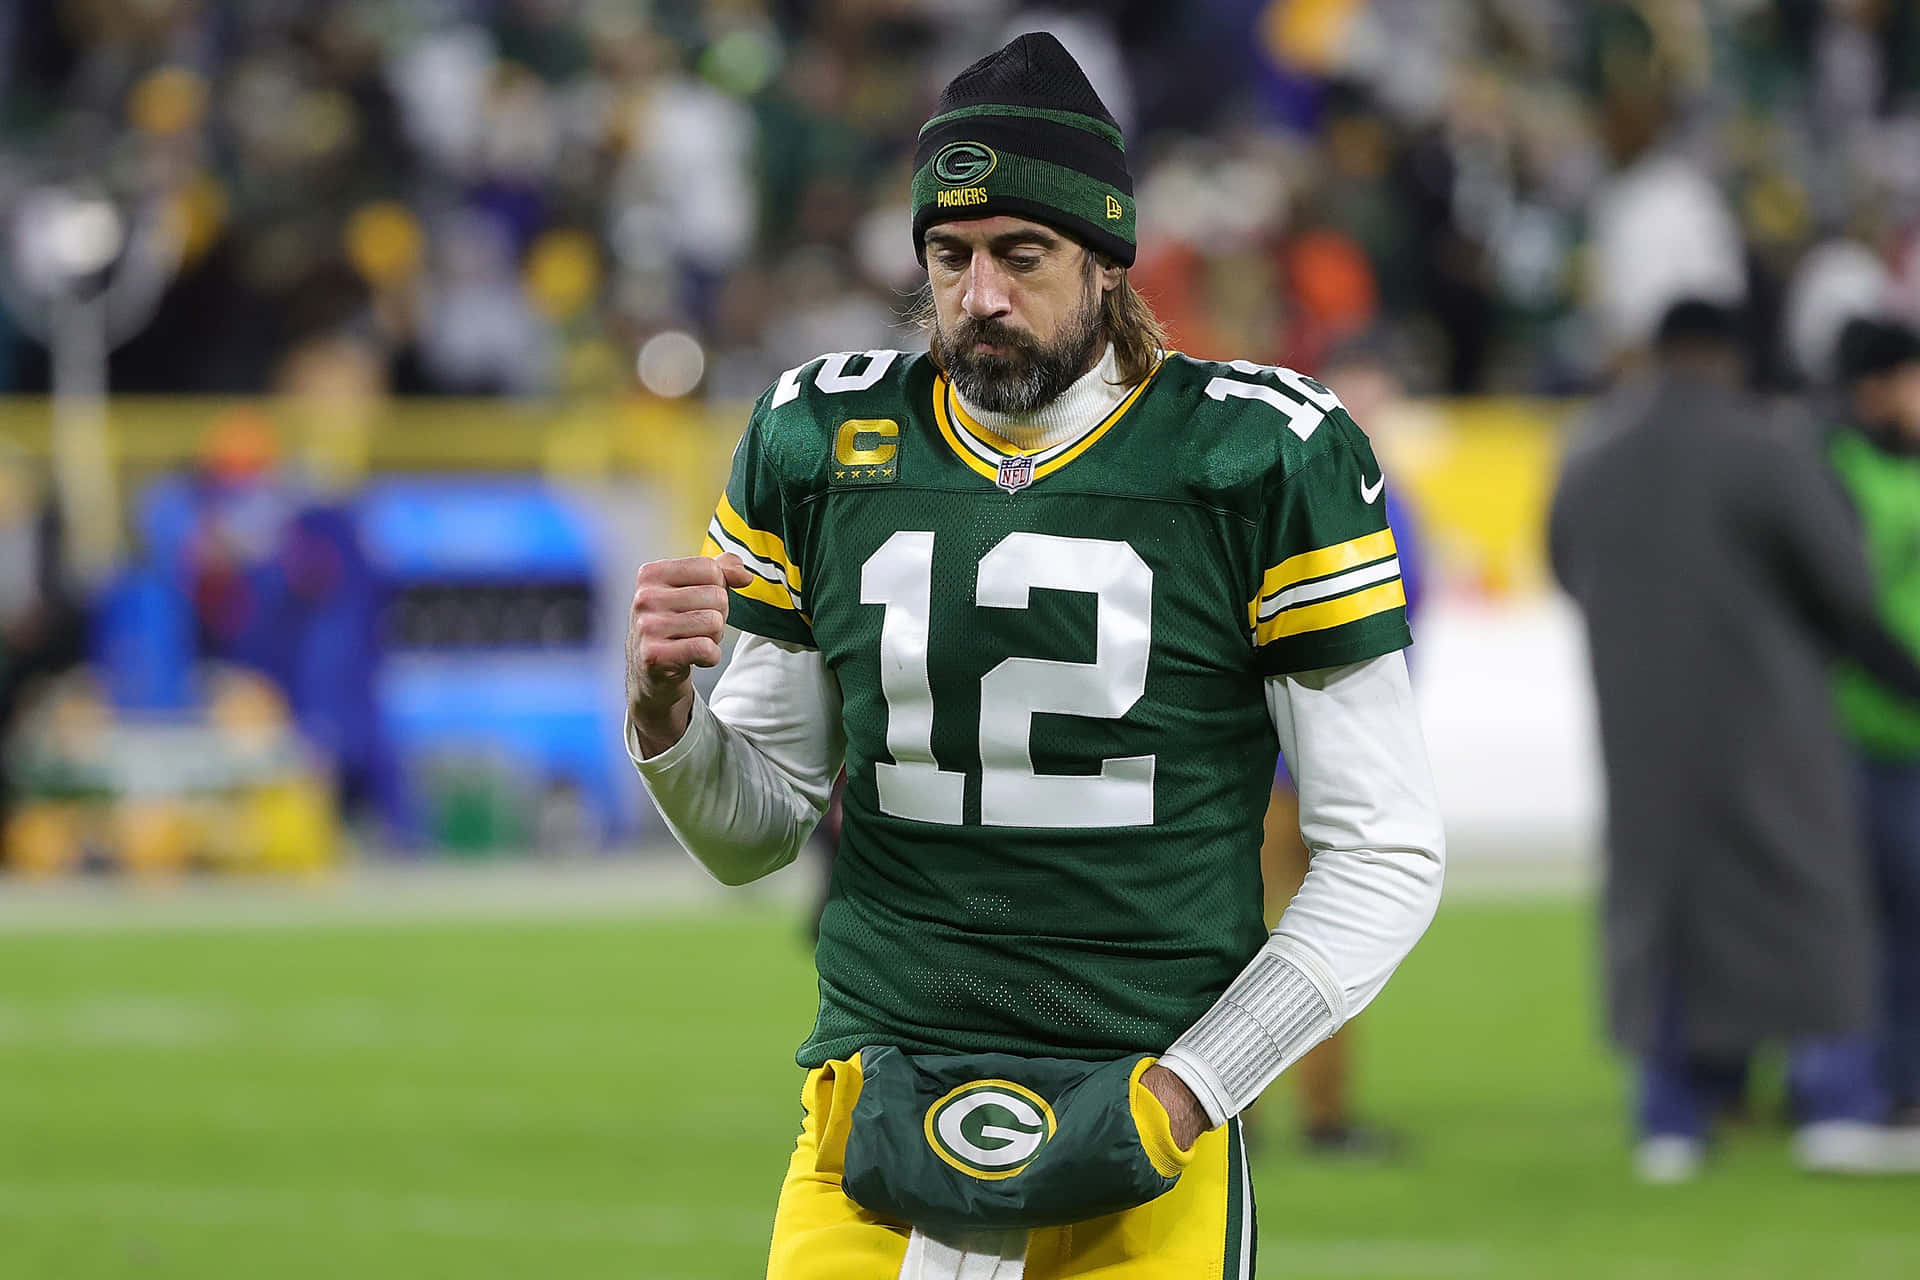 The Super Bowl MVP, Aaron Rodgers